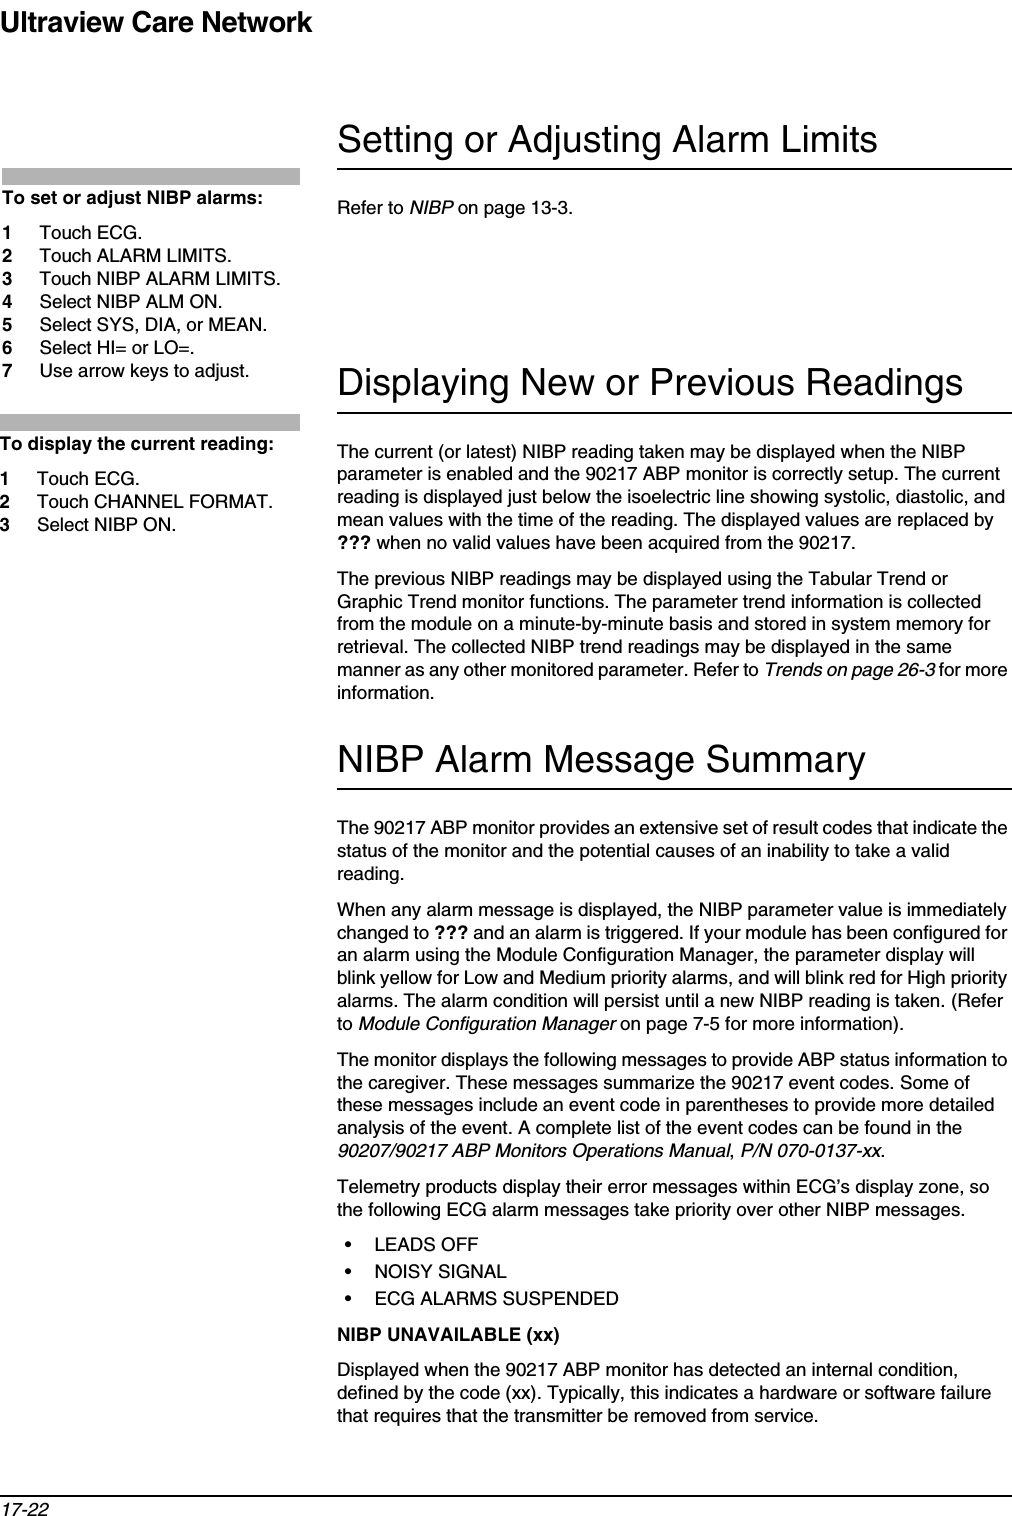 Ultraview Care Network17-22Setting or Adjusting Alarm LimitsRefer to NIBP on page 13-3.Displaying New or Previous ReadingsThe current (or latest) NIBP reading taken may be displayed when the NIBP parameter is enabled and the 90217 ABP monitor is correctly setup. The current reading is displayed just below the isoelectric line showing systolic, diastolic, and mean values with the time of the reading. The displayed values are replaced by ??? when no valid values have been acquired from the 90217.The previous NIBP readings may be displayed using the Tabular Trend or Graphic Trend monitor functions. The parameter trend information is collected from the module on a minute-by-minute basis and stored in system memory for retrieval. The collected NIBP trend readings may be displayed in the same manner as any other monitored parameter. Refer to Trends on page 26-3 for more information.NIBP Alarm Message SummaryThe 90217 ABP monitor provides an extensive set of result codes that indicate the status of the monitor and the potential causes of an inability to take a valid reading.When any alarm message is displayed, the NIBP parameter value is immediately changed to ??? and an alarm is triggered. If your module has been configured for an alarm using the Module Configuration Manager, the parameter display will blink yellow for Low and Medium priority alarms, and will blink red for High priority alarms. The alarm condition will persist until a new NIBP reading is taken. (Refer to Module Configuration Manager on page 7-5 for more information).The monitor displays the following messages to provide ABP status information to the caregiver. These messages summarize the 90217 event codes. Some of these messages include an event code in parentheses to provide more detailed analysis of the event. A complete list of the event codes can be found in the90207/90217 ABP Monitors Operations Manual,P/N 070-0137-xx.Telemetry products display their error messages within ECG’s display zone, so the following ECG alarm messages take priority over other NIBP messages.• LEADS OFF• NOISY SIGNAL• ECG ALARMS SUSPENDEDNIBP UNAVAILABLE (xx)Displayed when the 90217 ABP monitor has detected an internal condition, defined by the code (xx). Typically, this indicates a hardware or software failure that requires that the transmitter be removed from service. To set or adjust NIBP alarms: 1Touch ECG. 2Touch ALARM LIMITS. 3Touch NIBP ALARM LIMITS.4Select NIBP ALM ON.5Select SYS, DIA, or MEAN.6Select HI= or LO=.7Use arrow keys to adjust.To display the current reading:1Touch ECG.2Touch CHANNEL FORMAT.3Select NIBP ON.